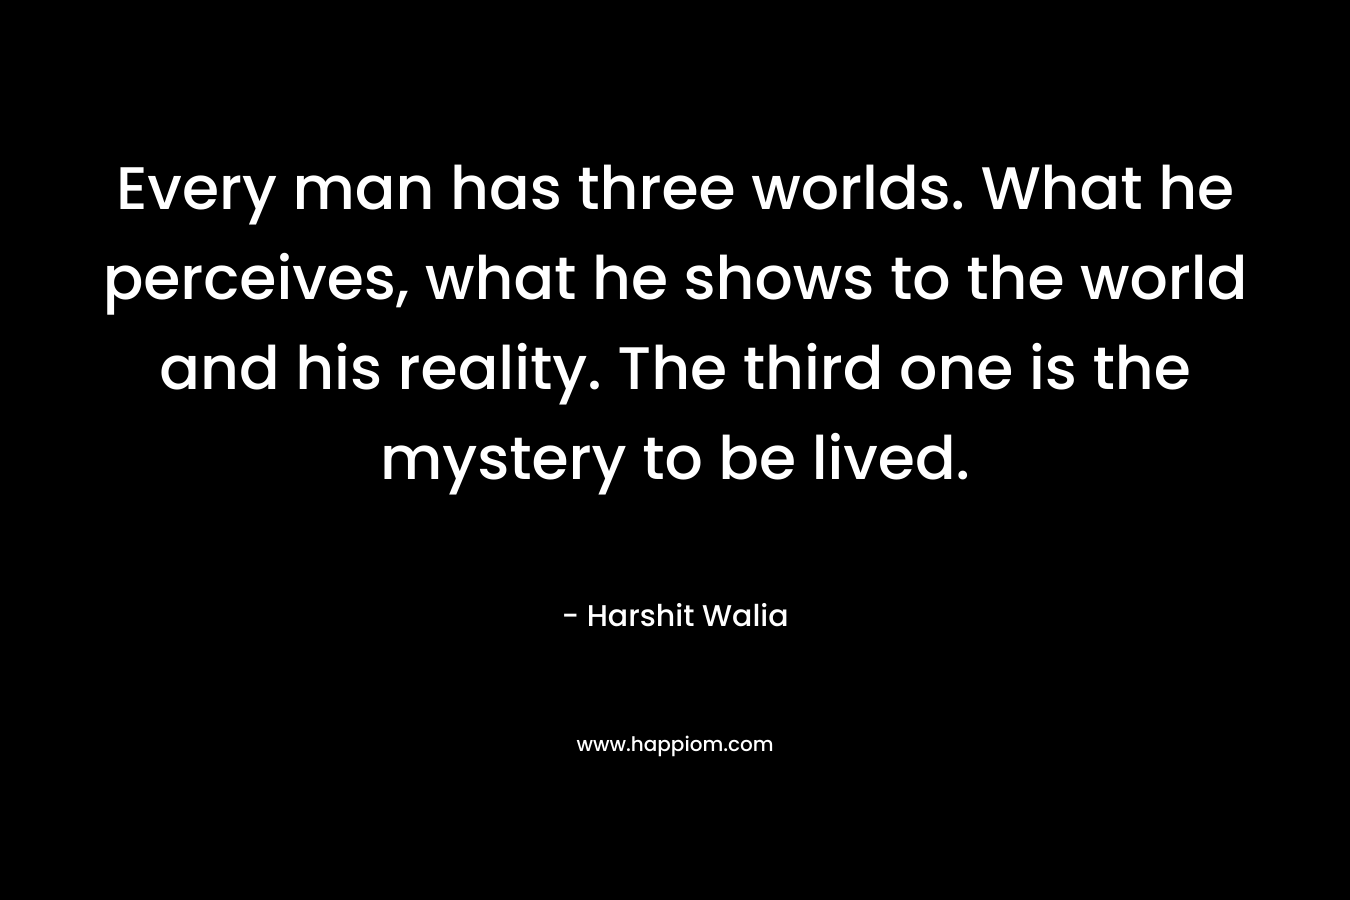 Every man has three worlds. What he perceives, what he shows to the world and his reality. The third one is the mystery to be lived.